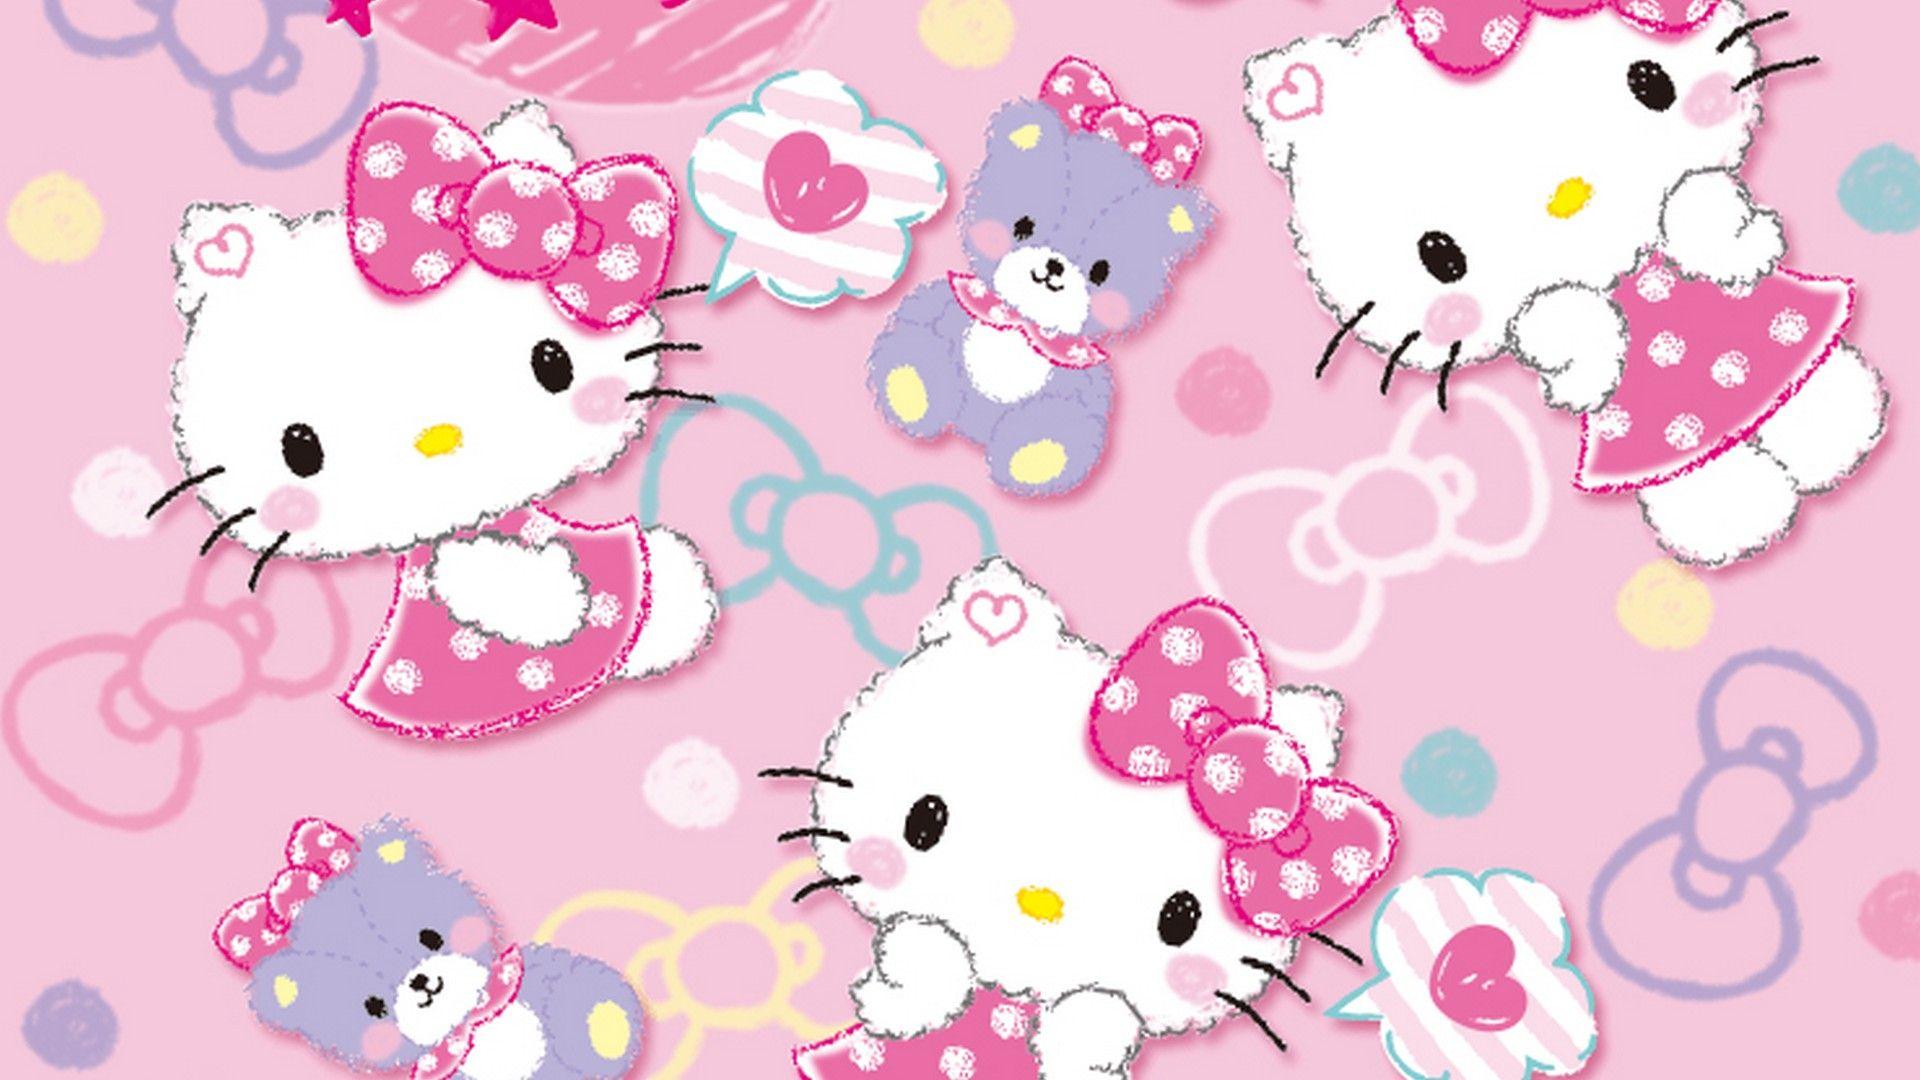 Hello Kitty Characters Background Wallpaper HD Live Wallpaper HD. Hello kitty background, Hello kitty iphone wallpaper, Hello kitty wallpaper hd